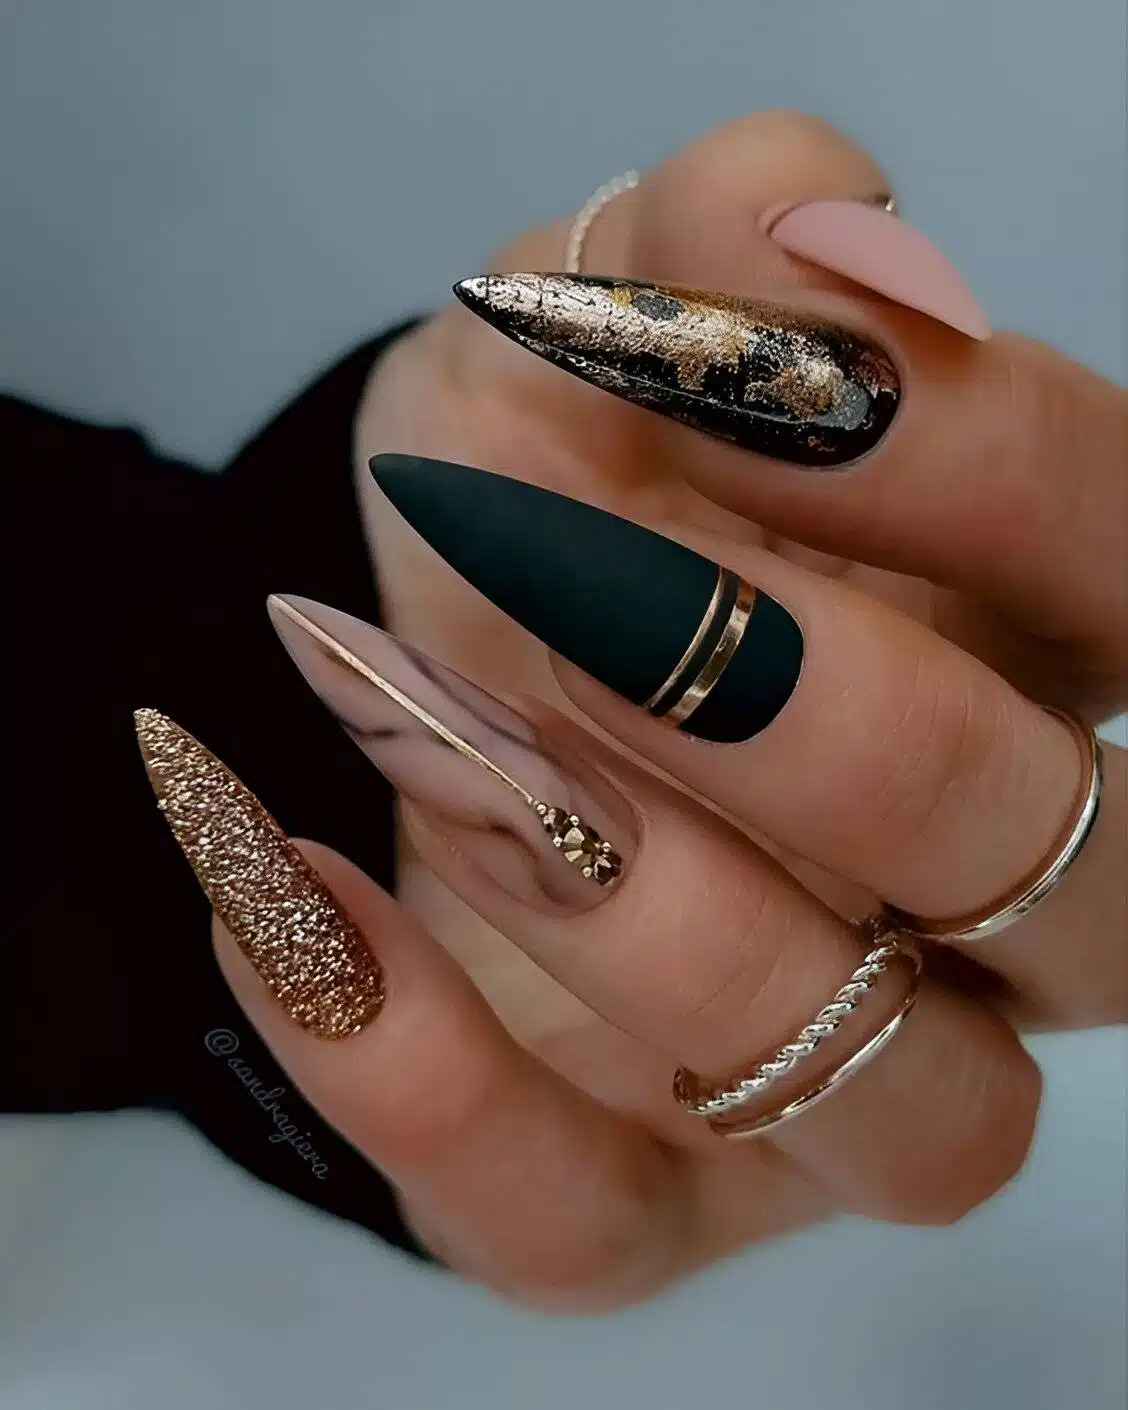 Attention, Beauty Queens: 30 Irresistible Black Acrylic Nail Designs - 211